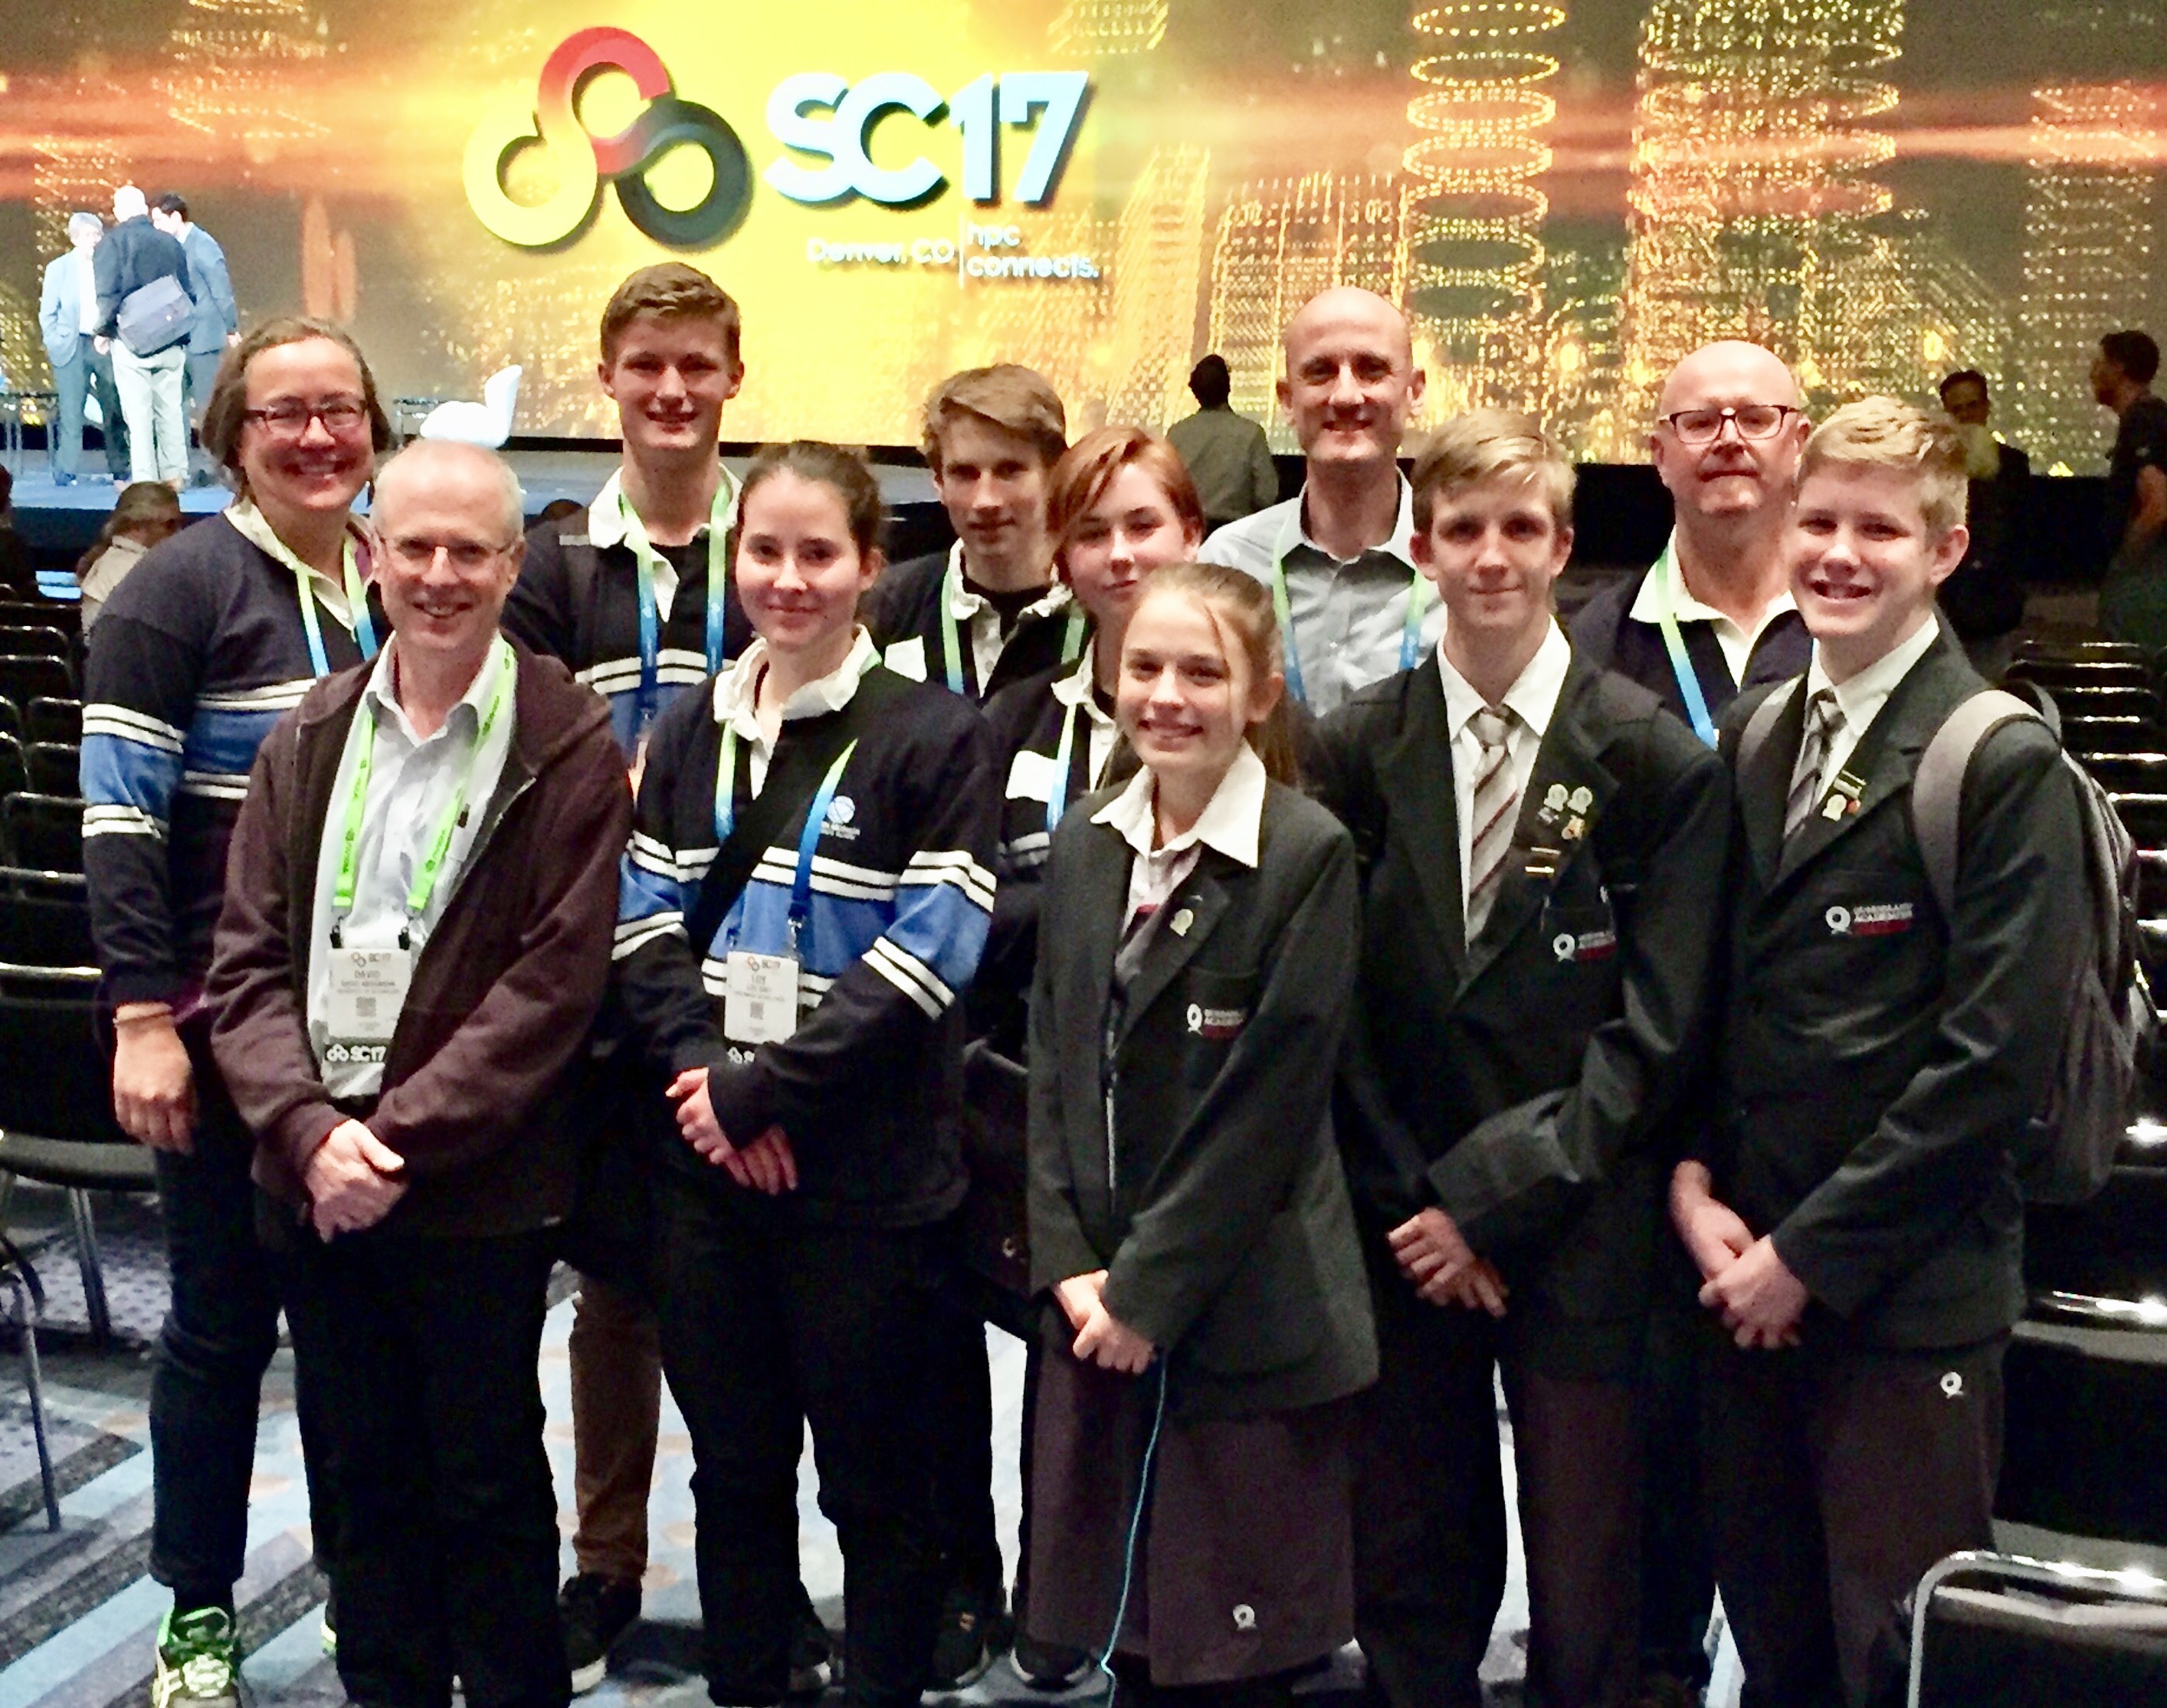 Prof. David Abramson (far left) with the JMSS and QASMT students and their chaperones at SC17.